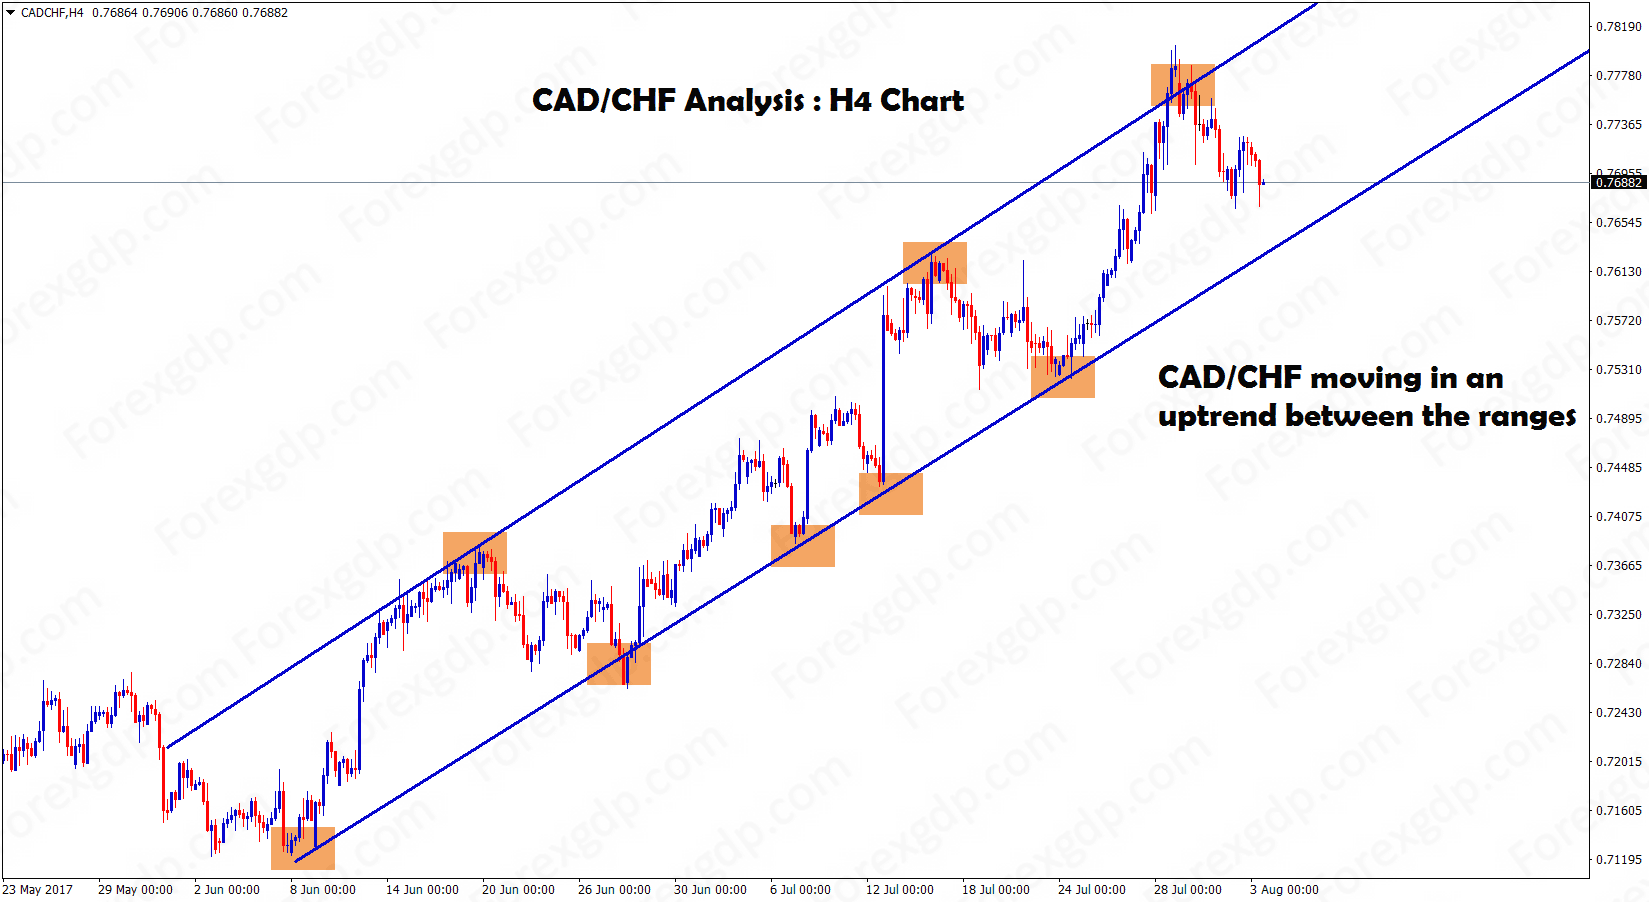 CADCHF moving slowly to the top trend zones